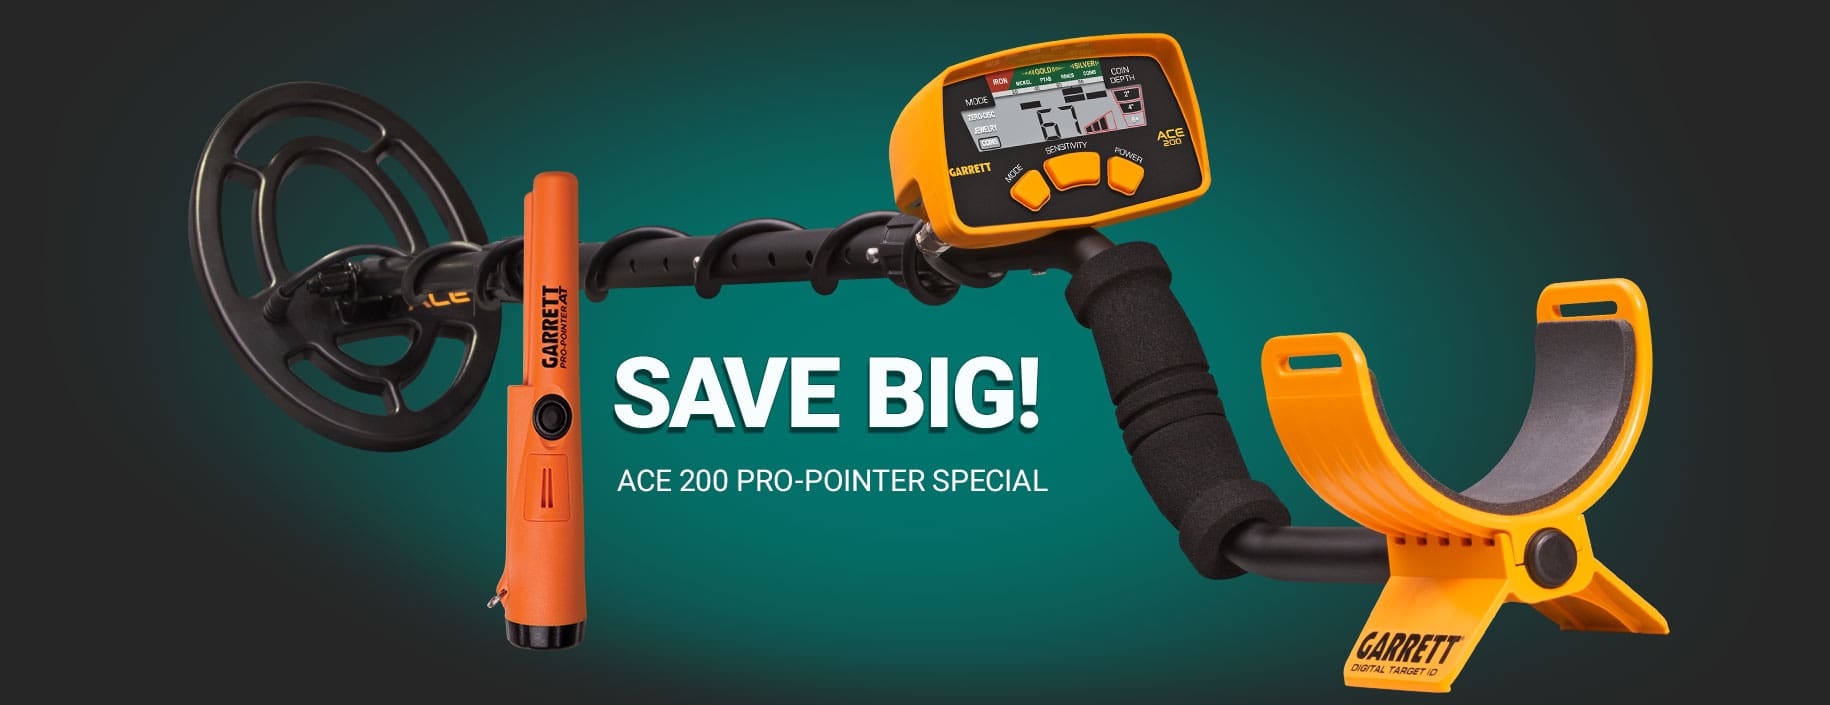 ACE 200 Pro-Pointer Special. Save Big!